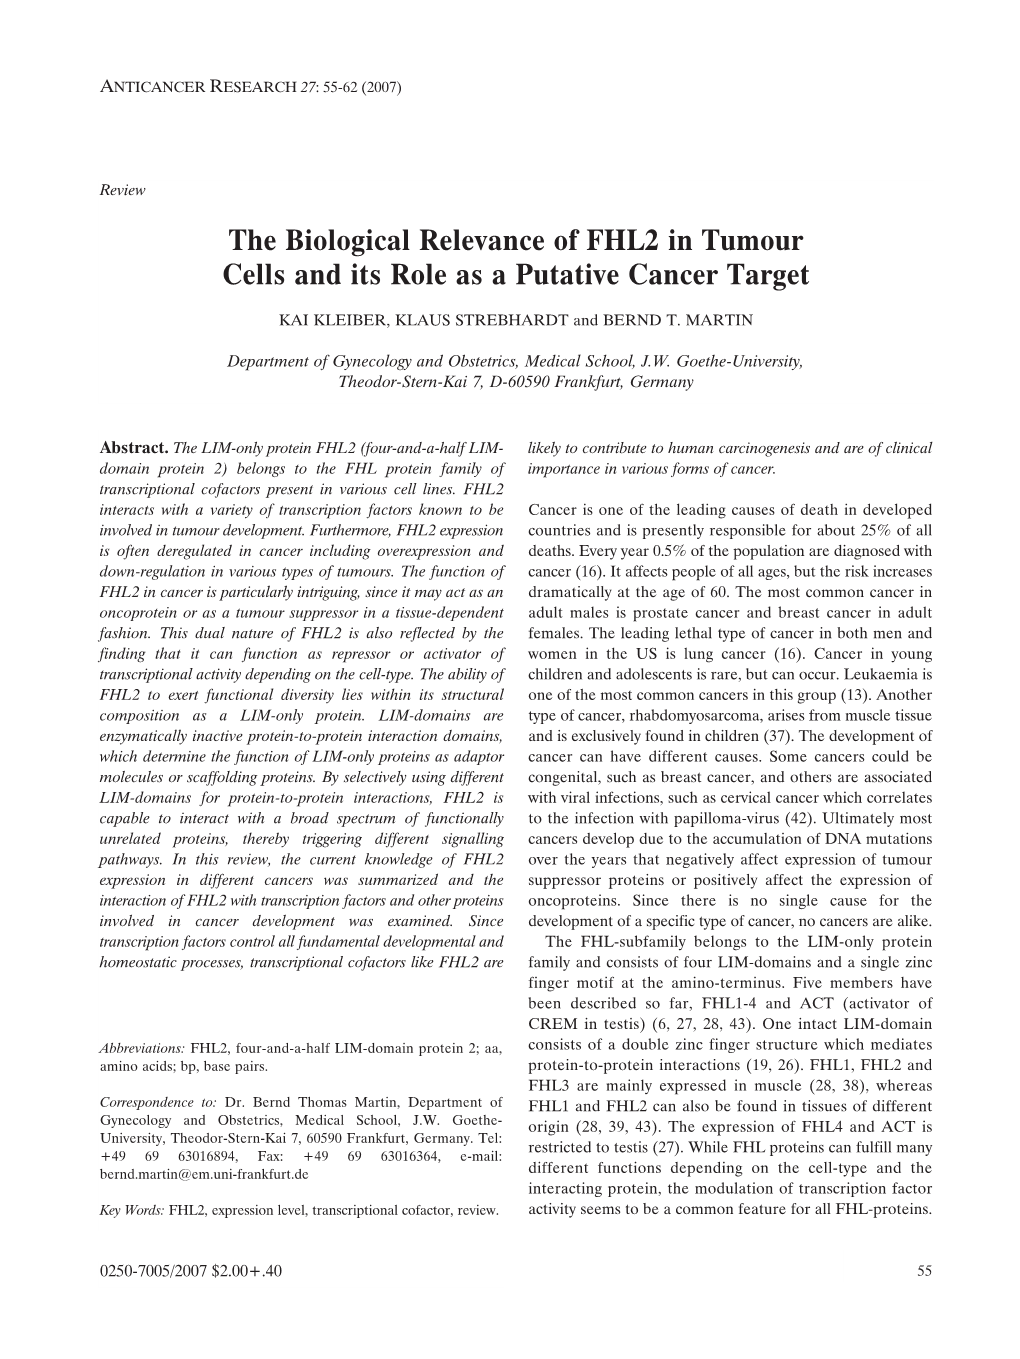 The Biological Relevance of FHL2 in Tumour Cells and Its Role As a Putative Cancer Target